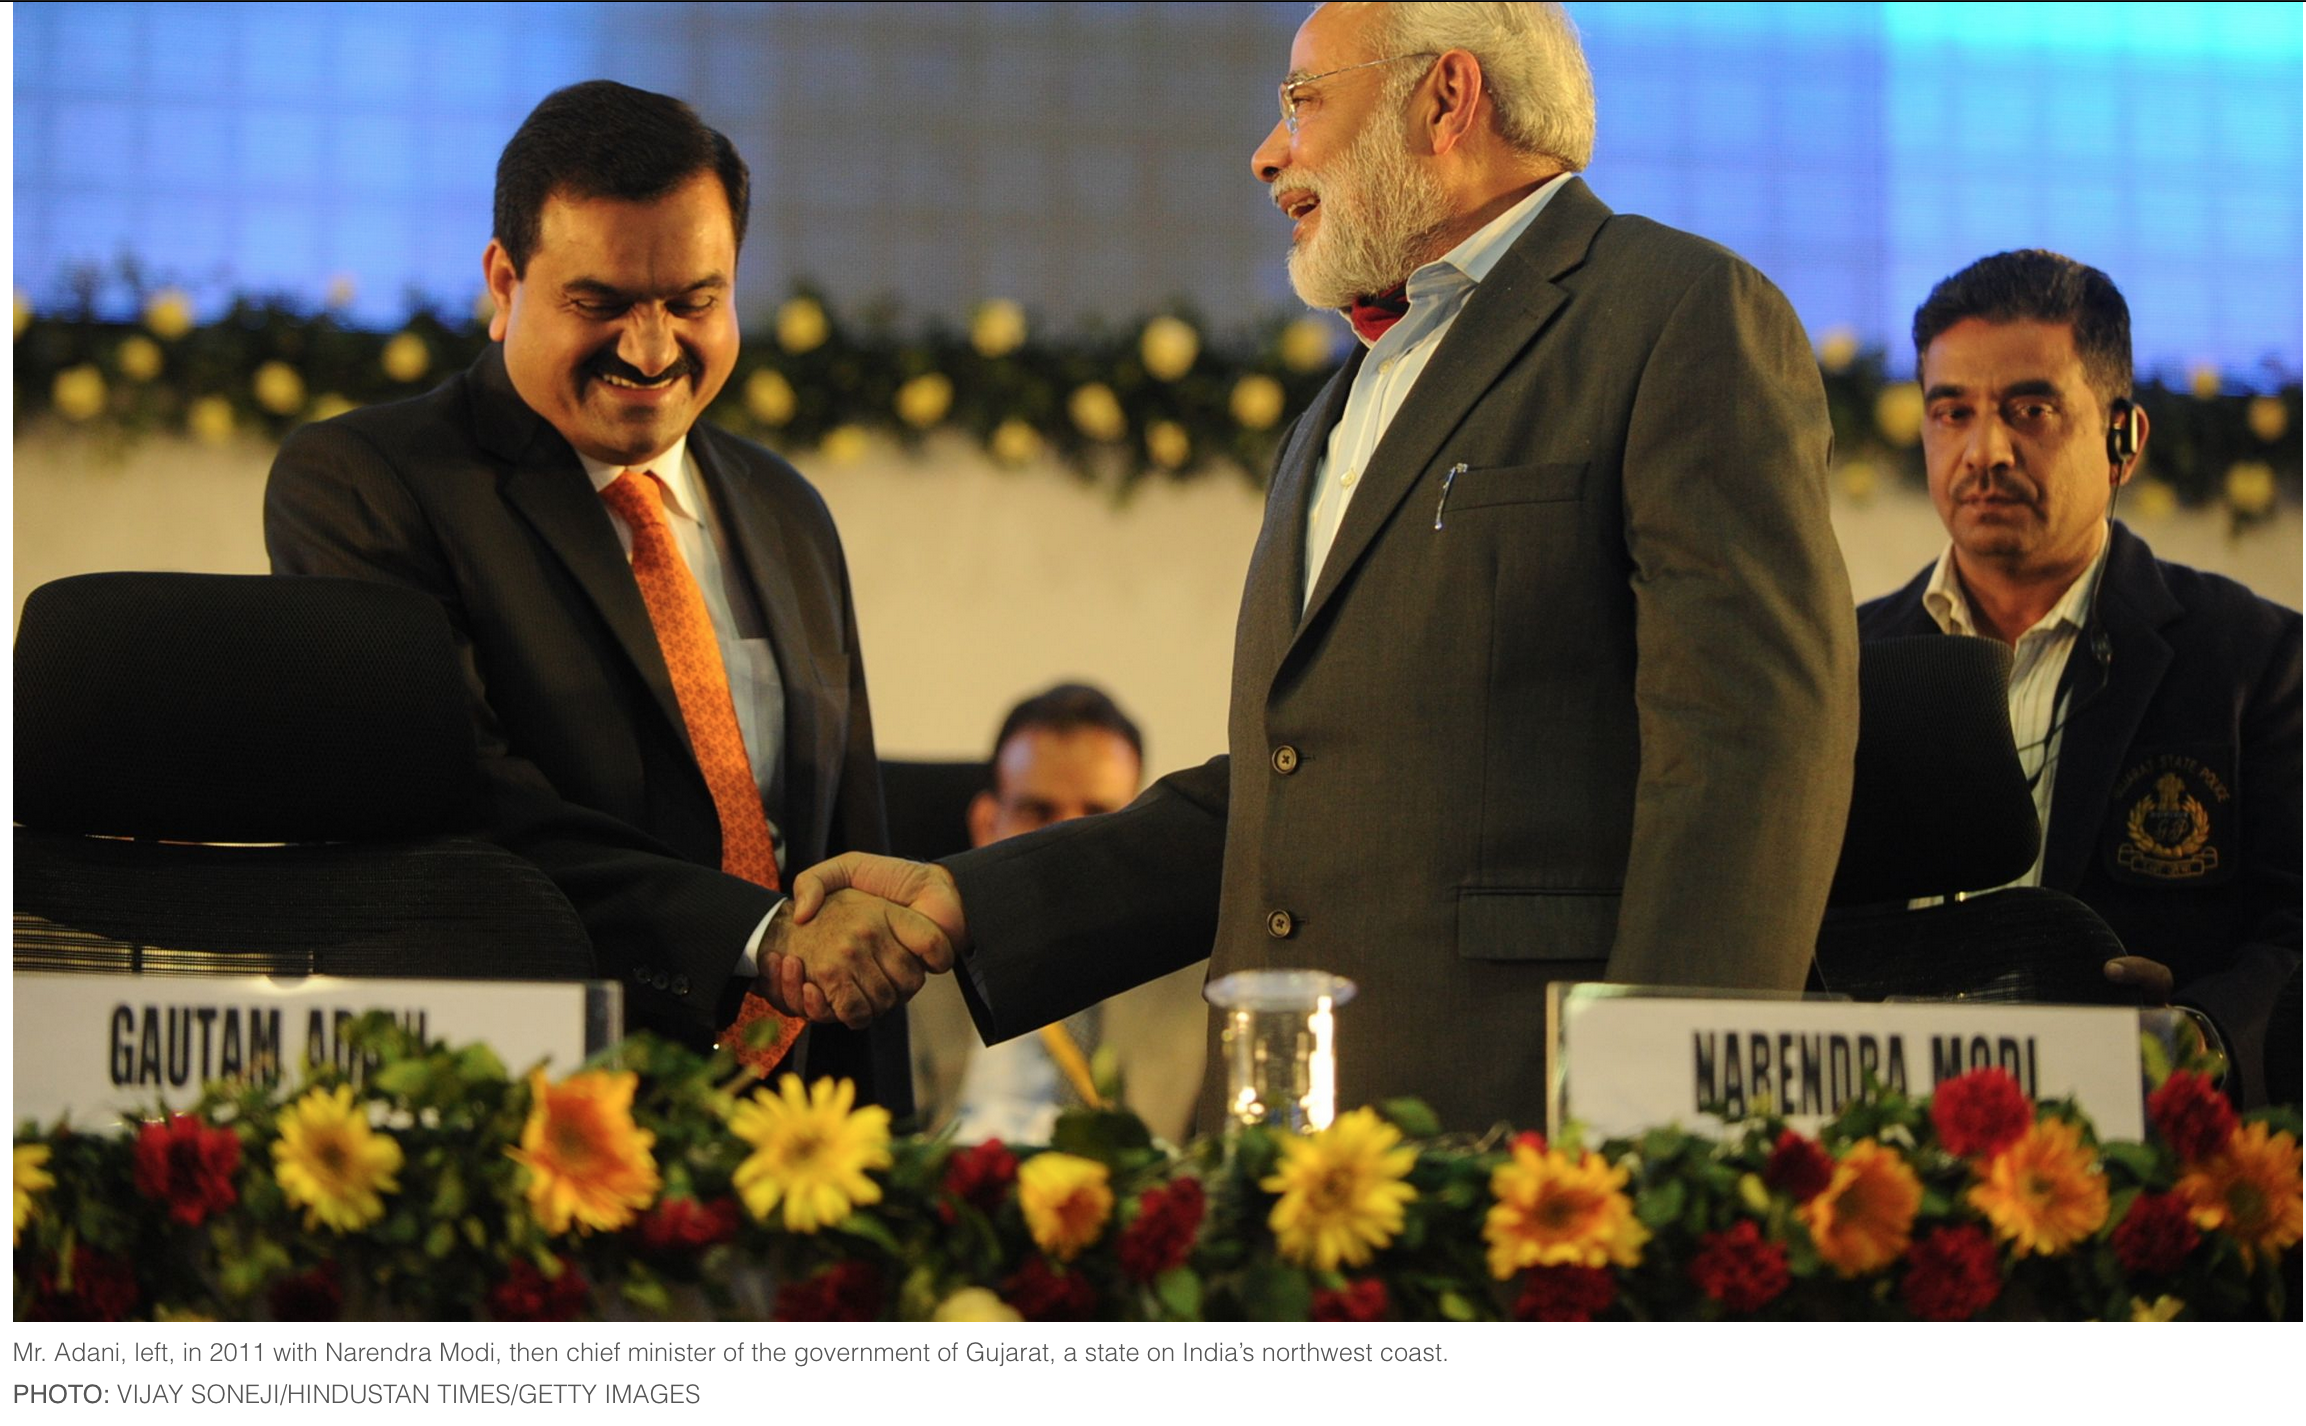 Gautam Adani Was Briefly World's Richest Man Only To Be Brought Down By An American Short-Seller